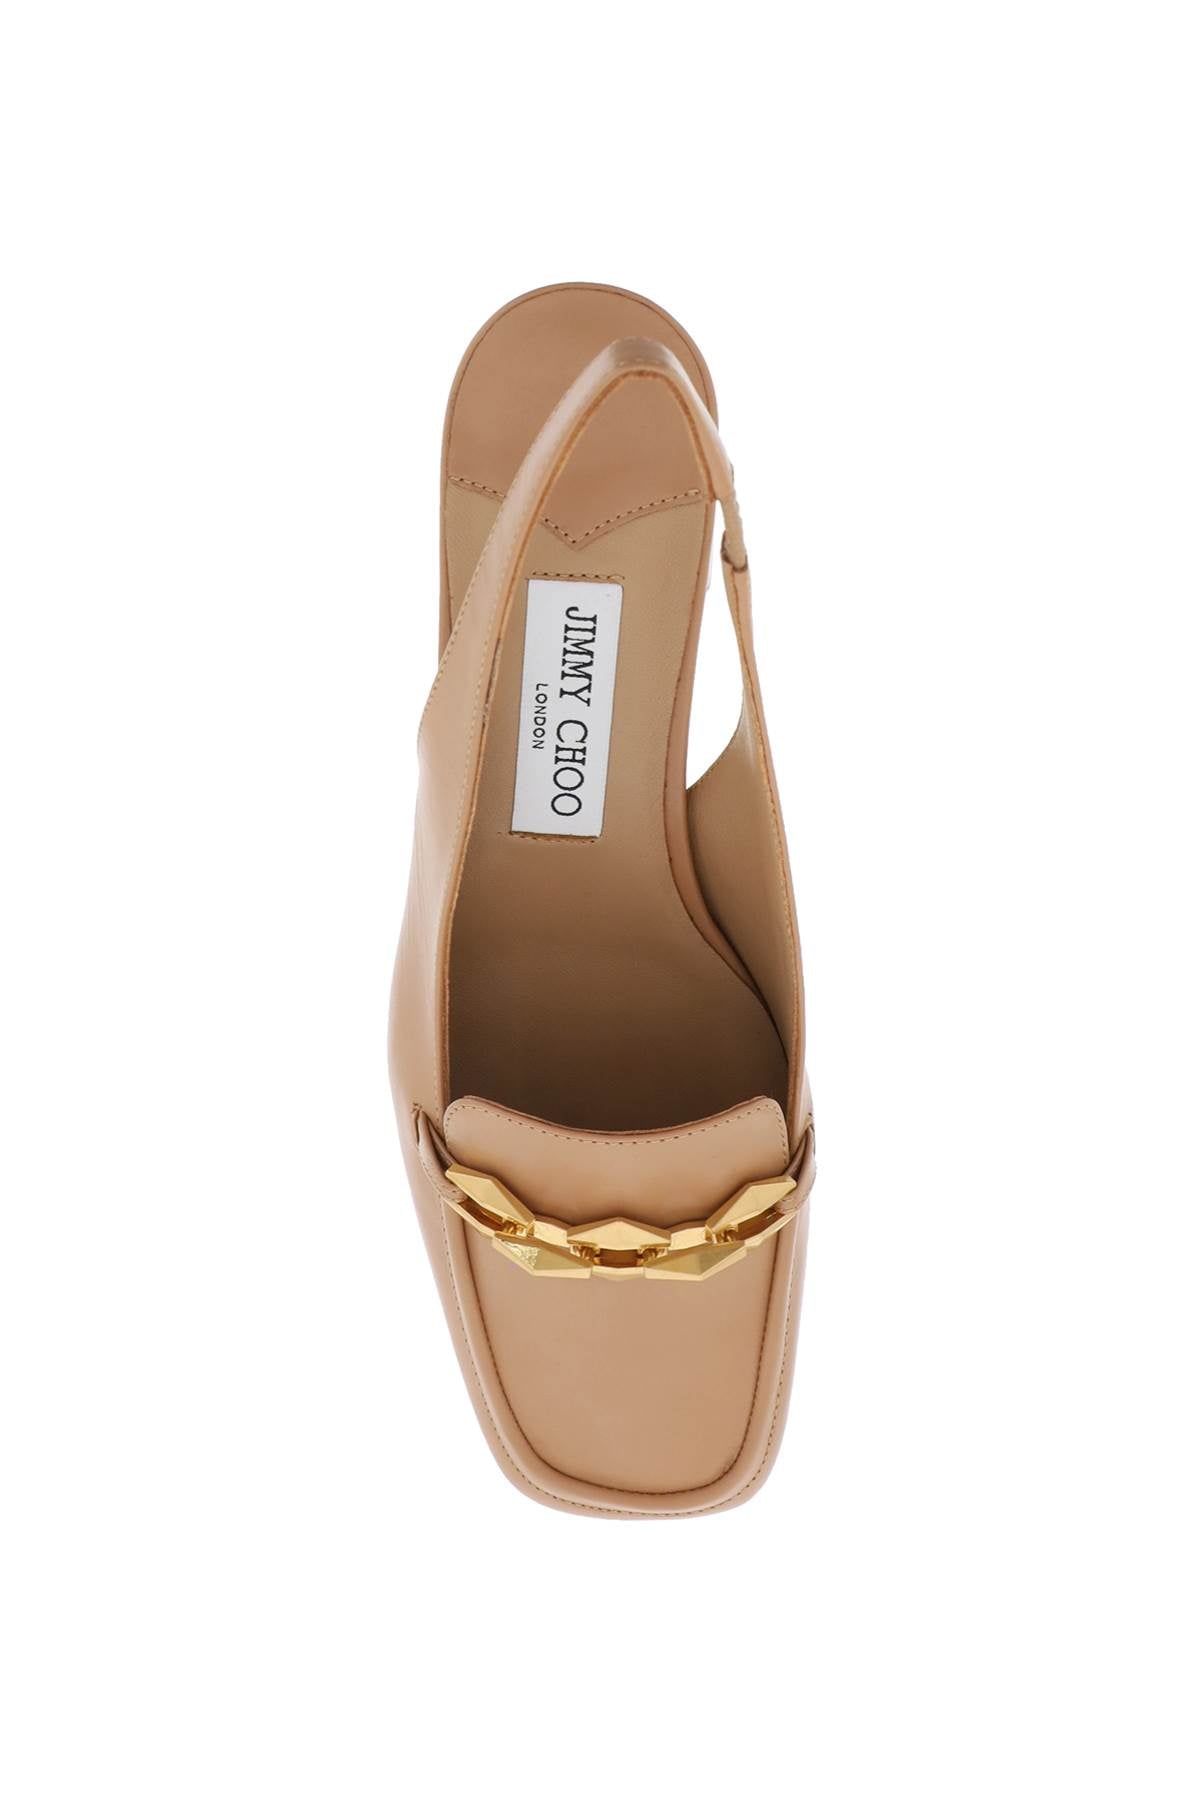 JIMMY CHOO Brown Leather Slingback Pumps with Gold-Tone Chain Detail for Women